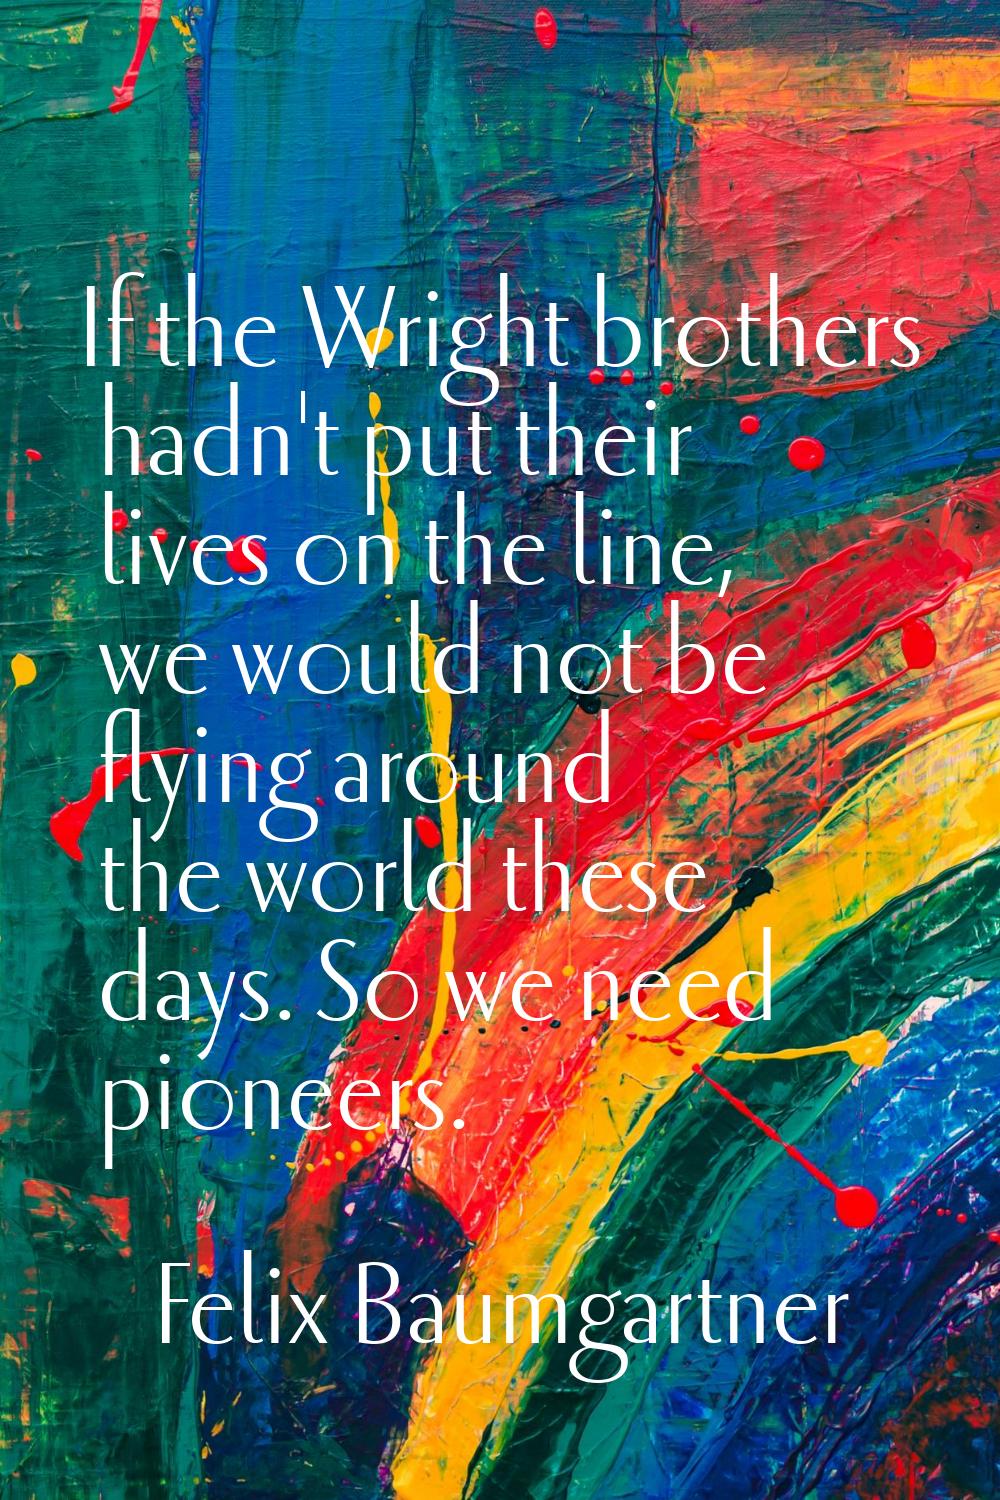 If the Wright brothers hadn't put their lives on the line, we would not be flying around the world 